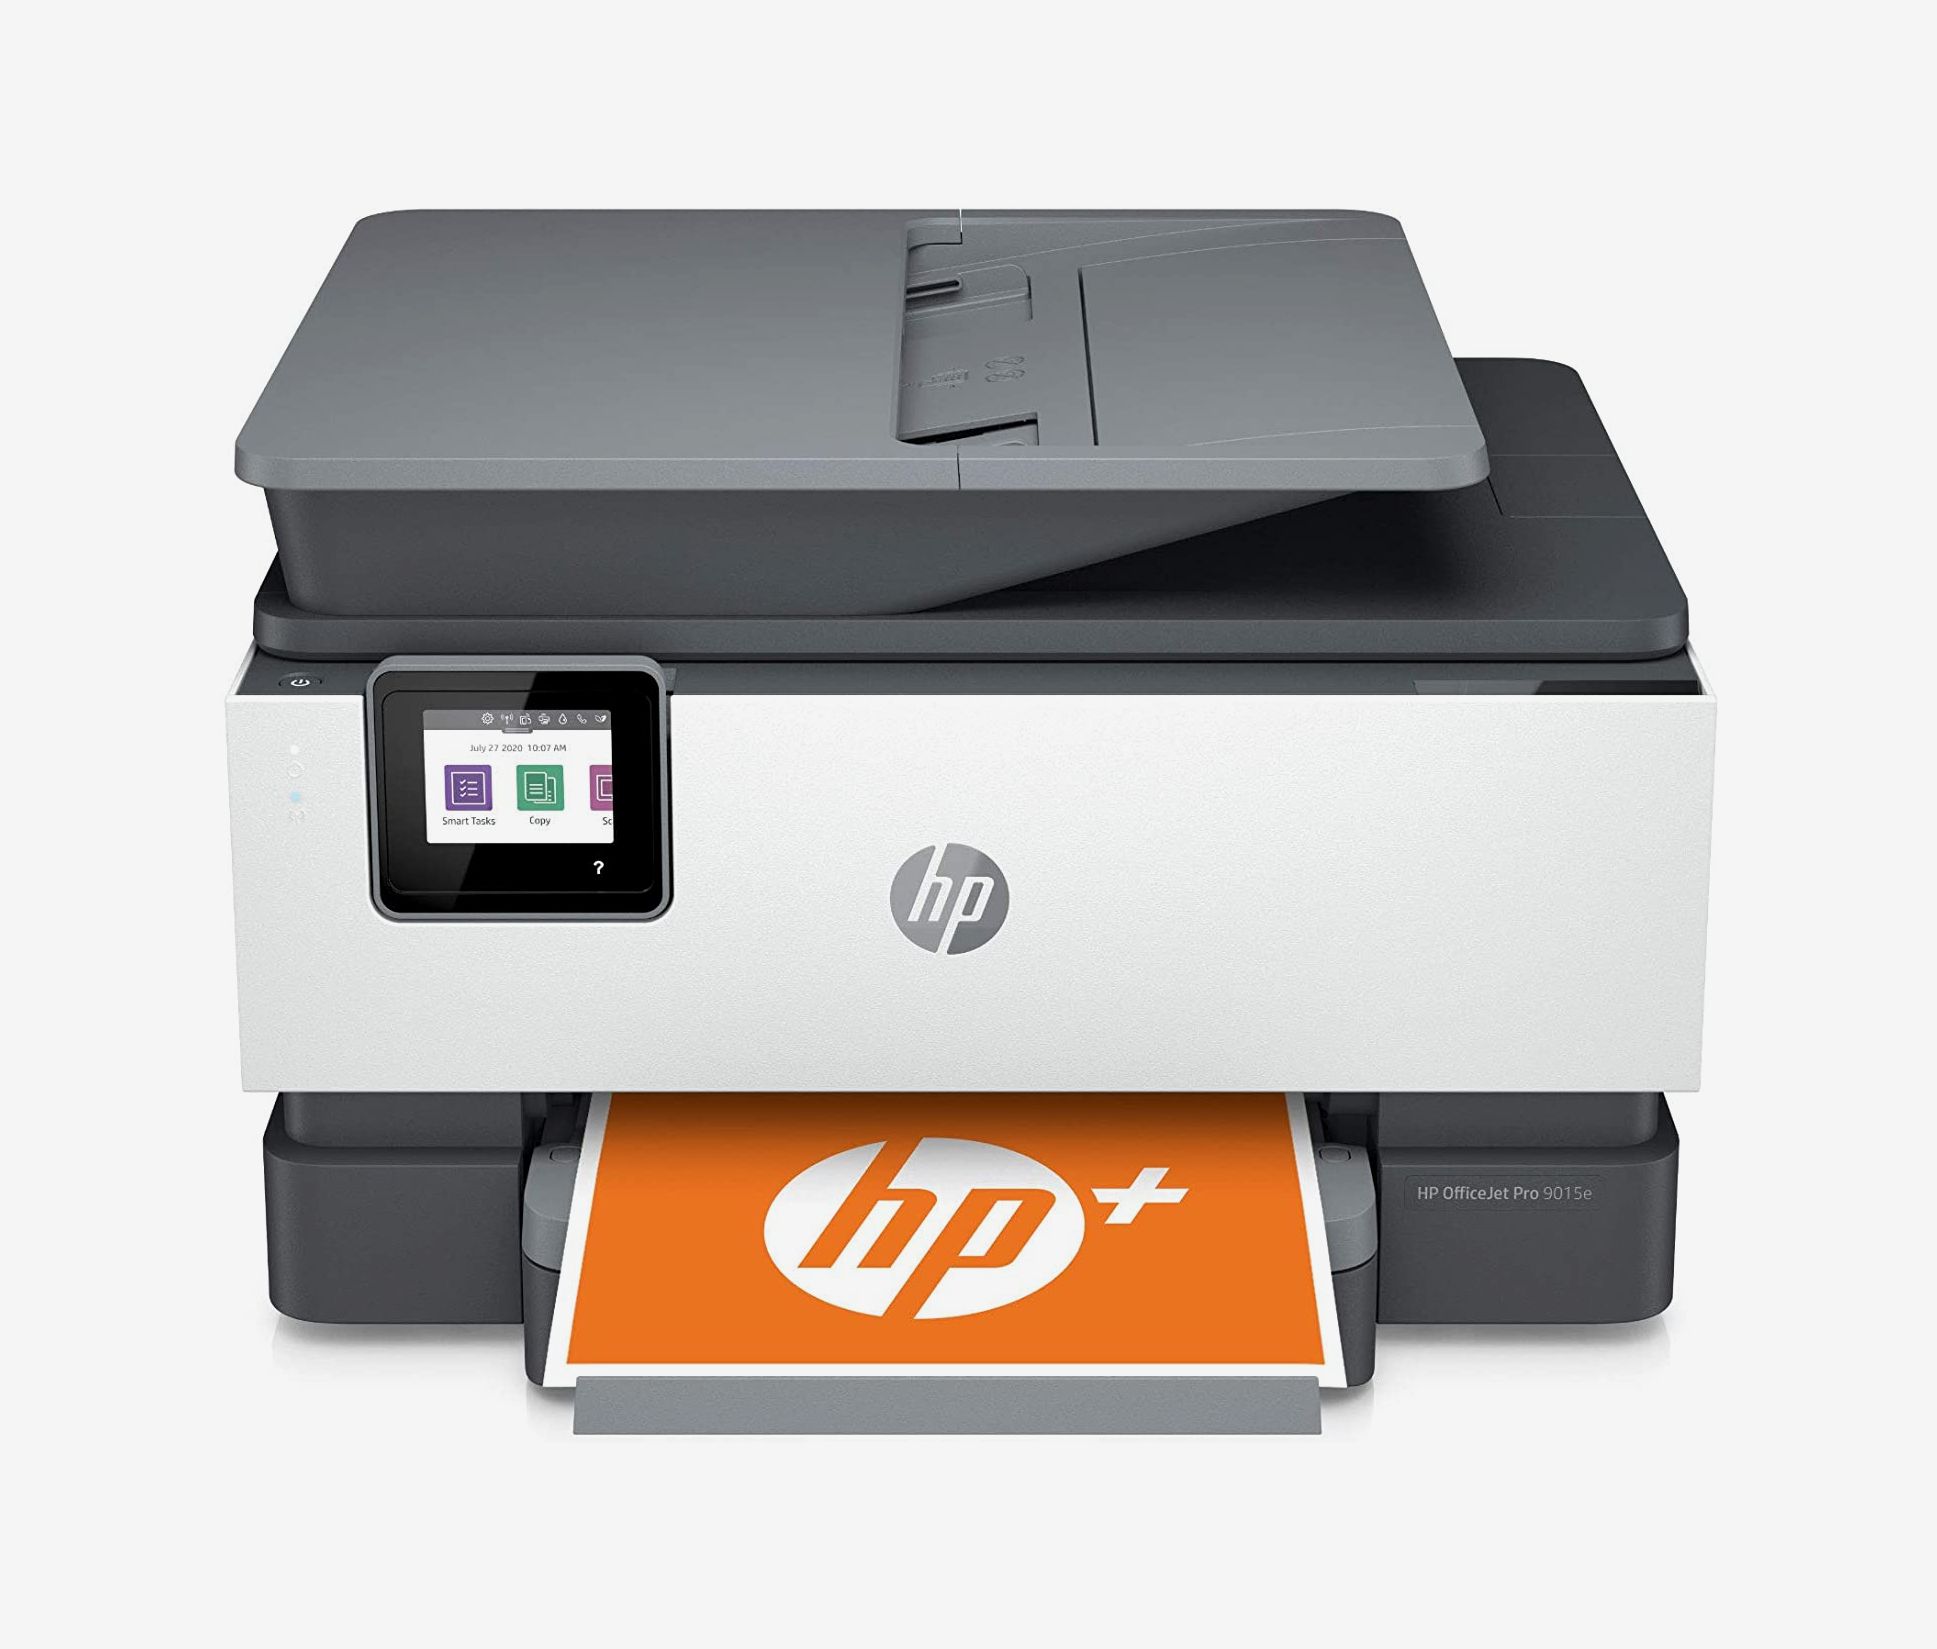 where to get the best home printer scanner copier